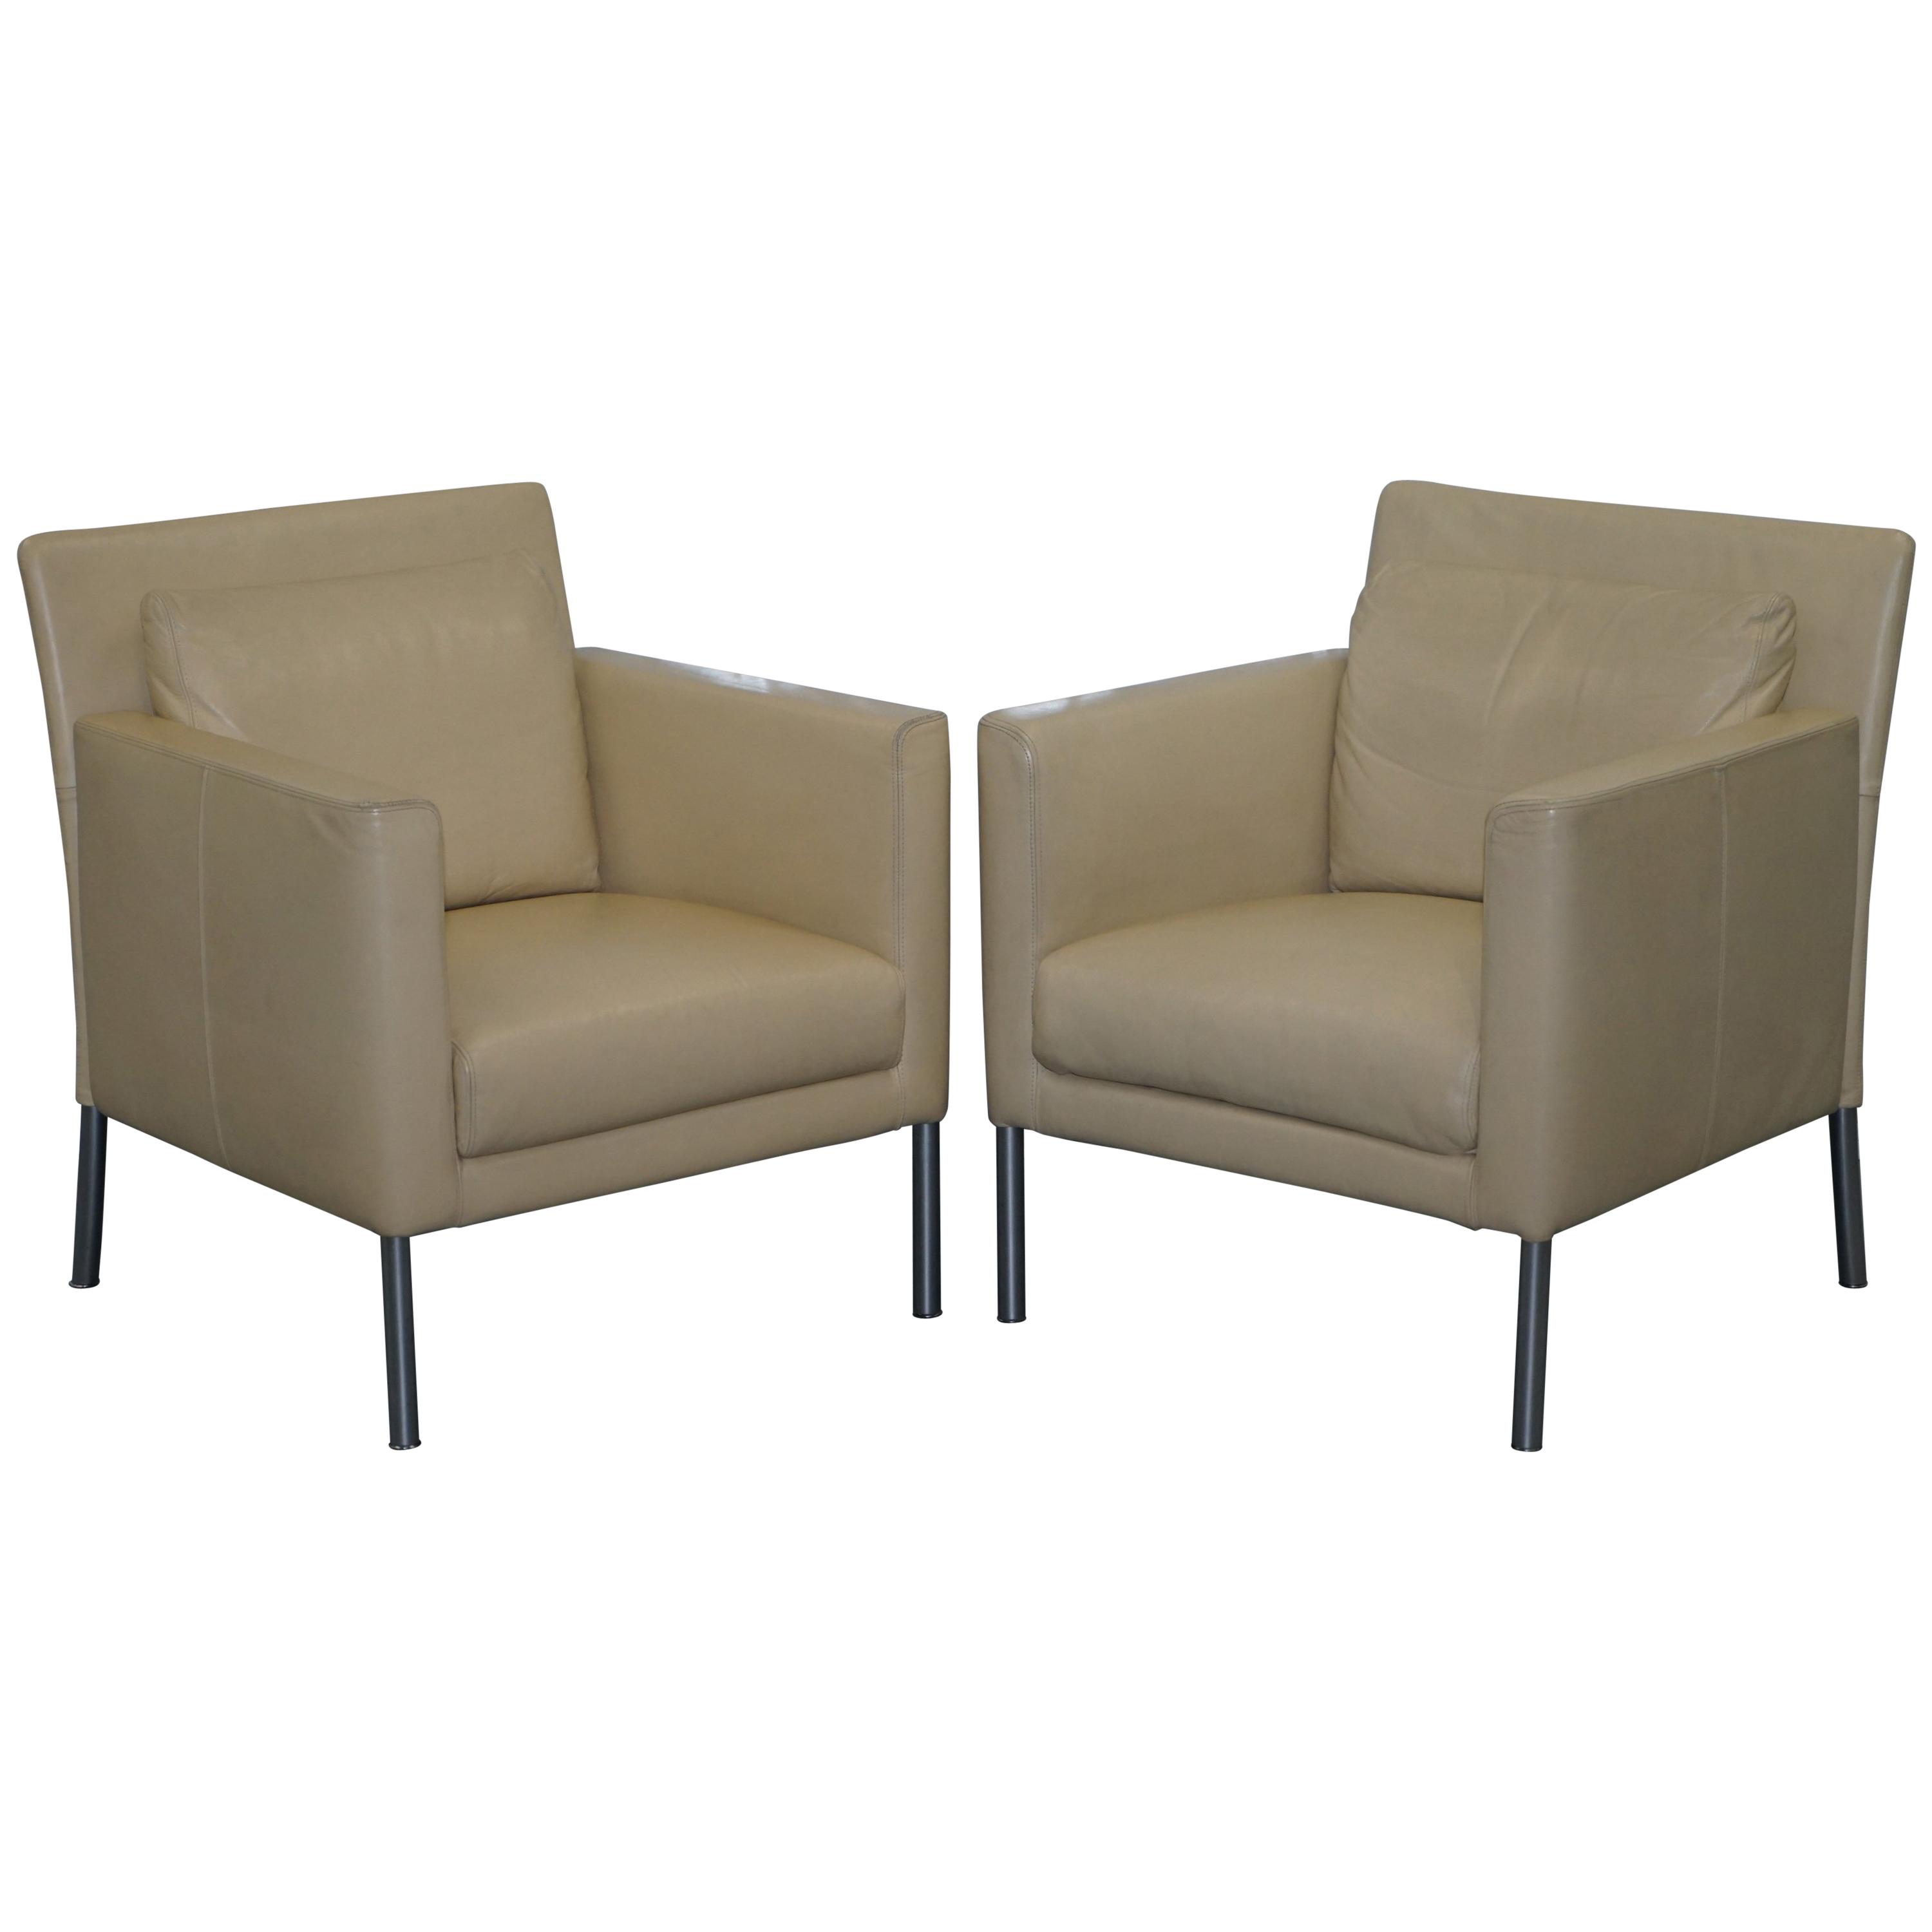 Pair of Walter Knoll Jason 391 Cream Leather Contemporary Armchairs For Sale